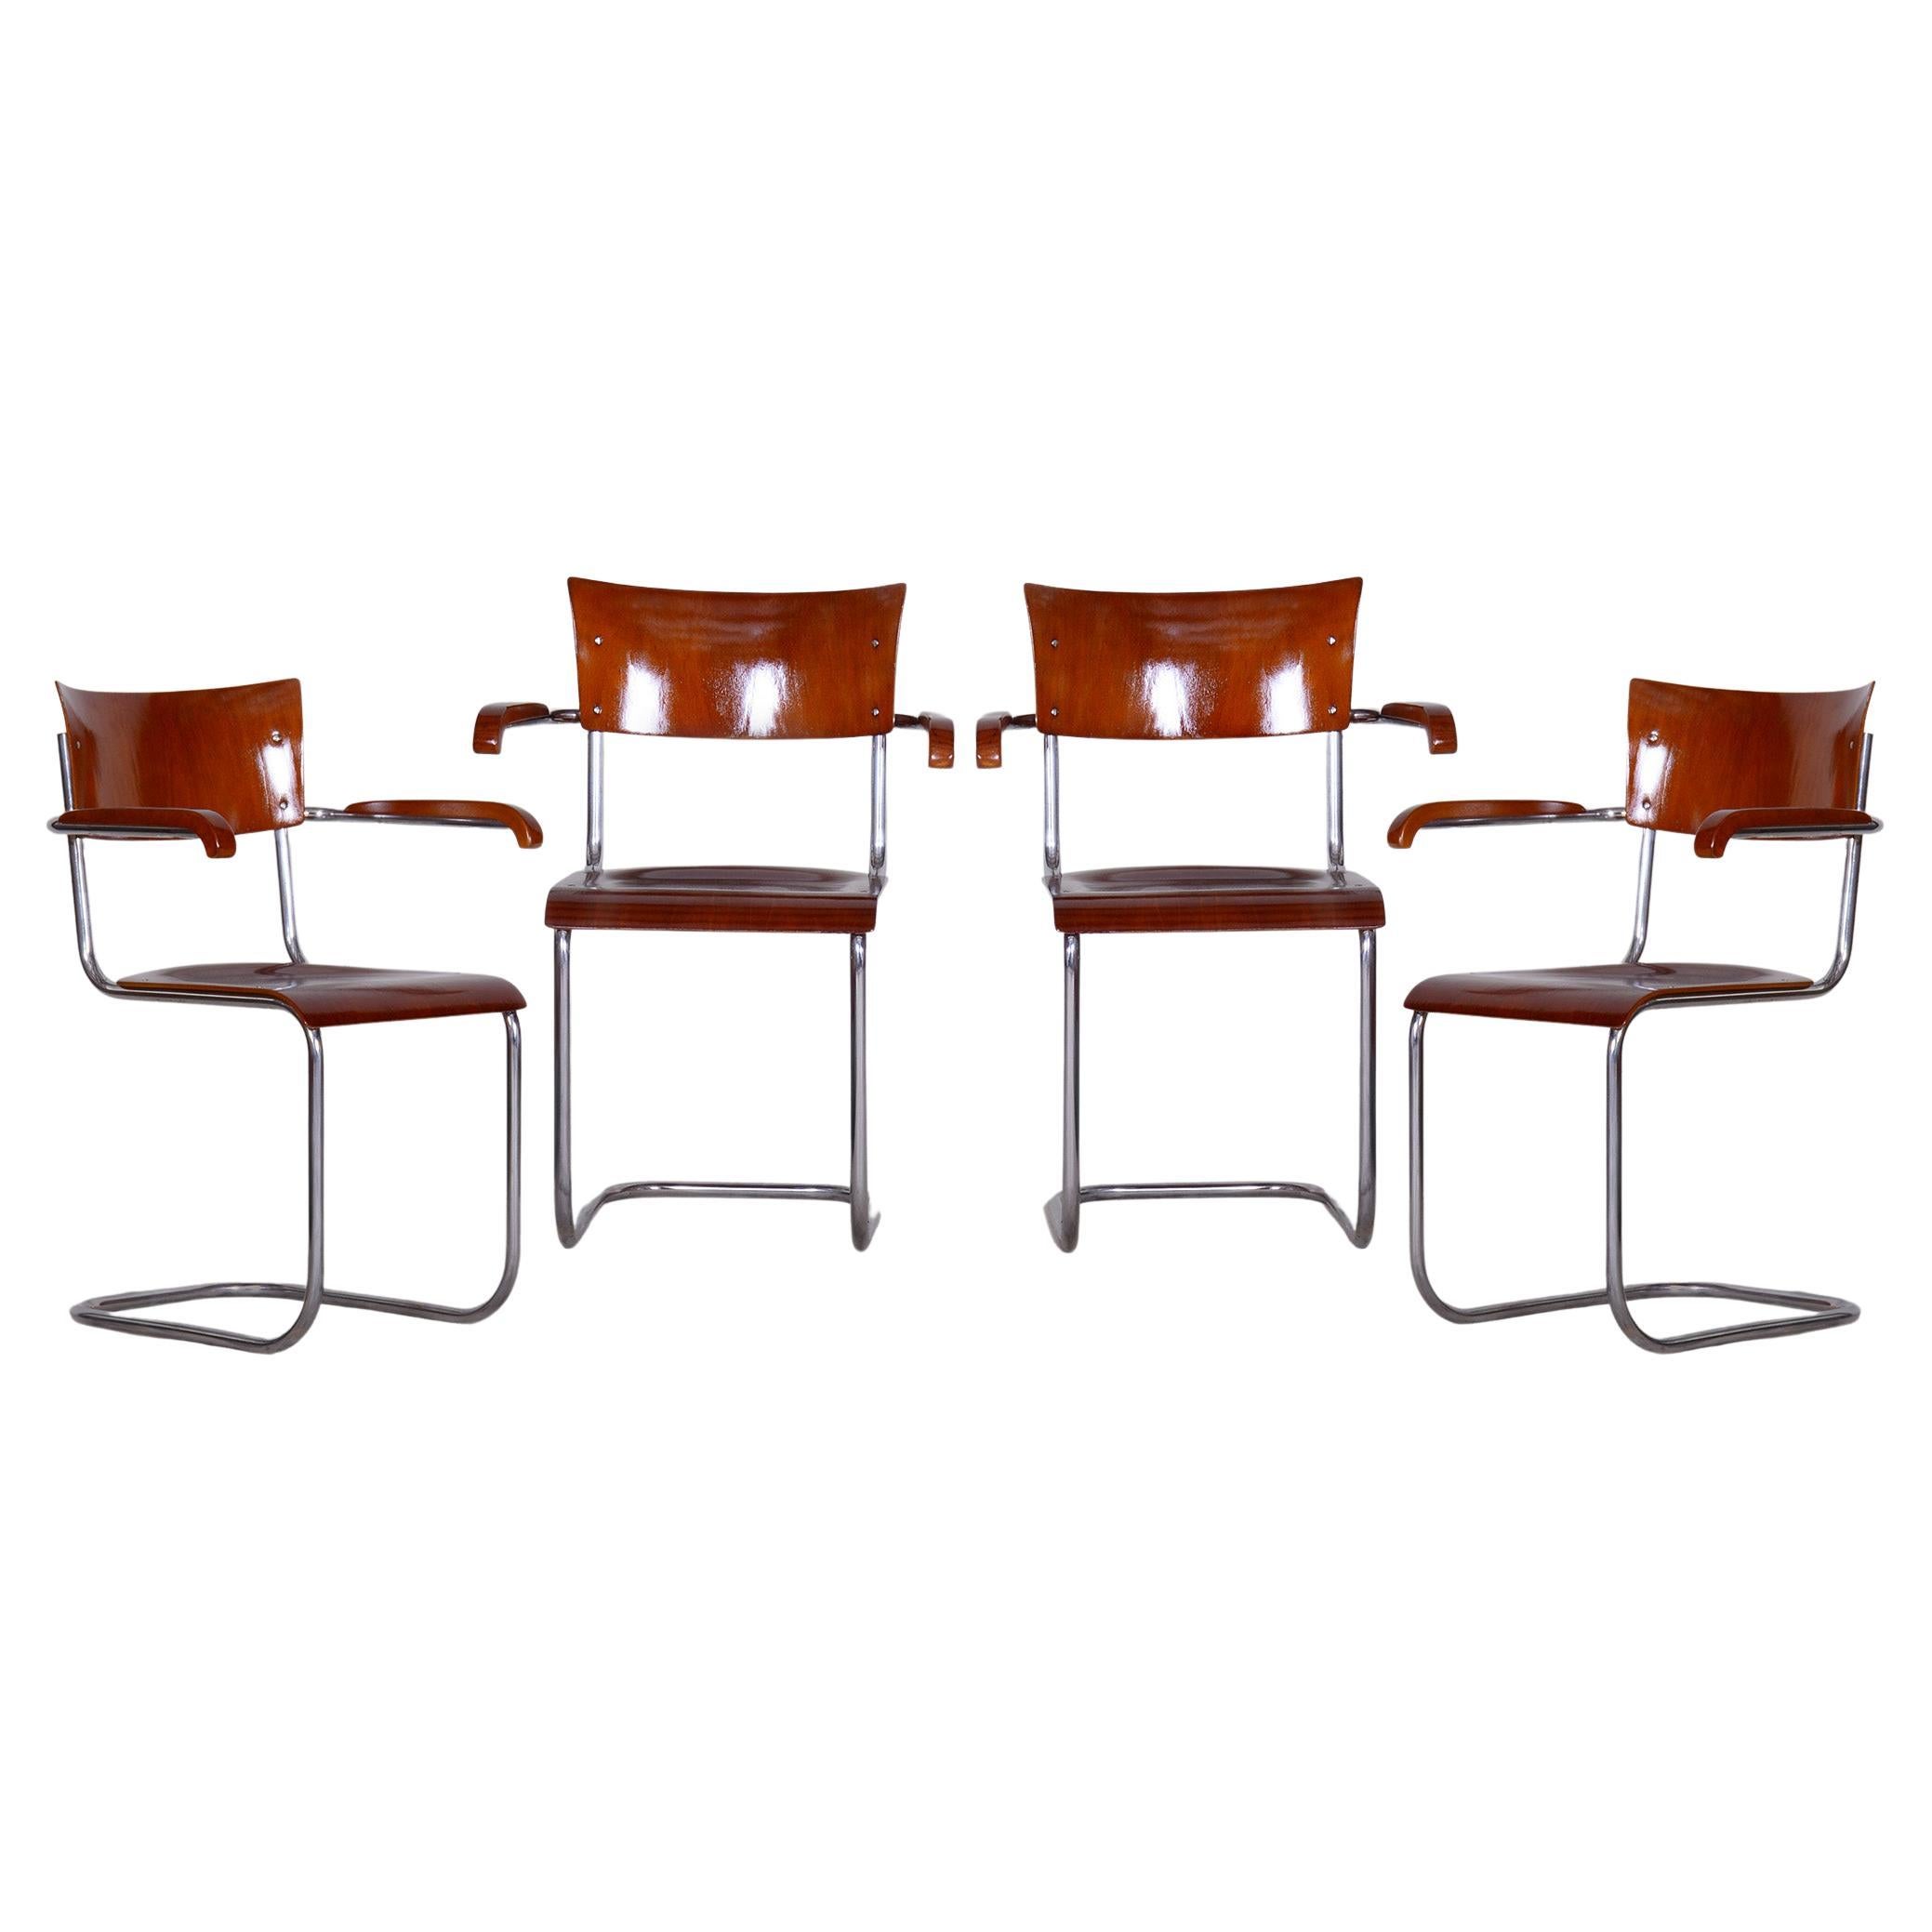 Set of 4 Restored Bauhaus Beech Plywood Armchairs by Mart Stam, 1930s, Germany